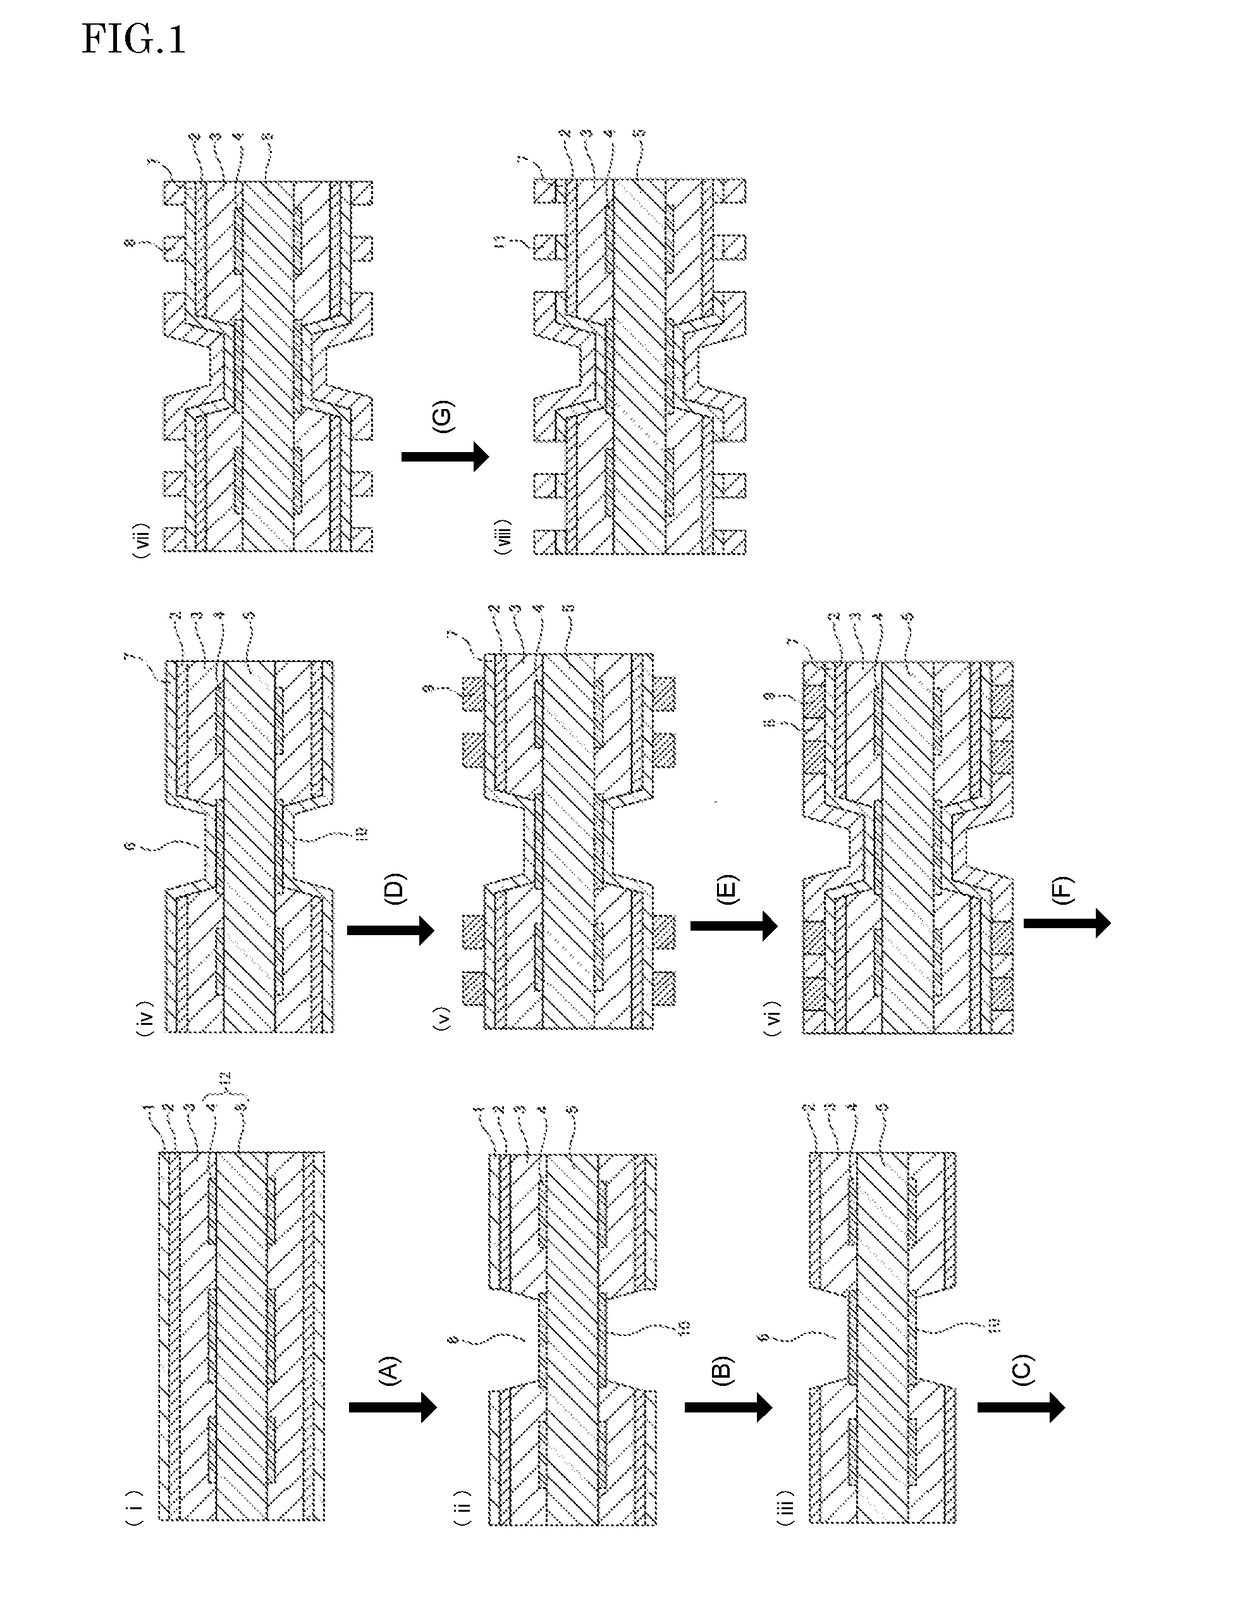 Multilayer printed wiring board production method, adhesive layer-equipped metal foil, metal-clad laminate, and multilayer printed wiring board